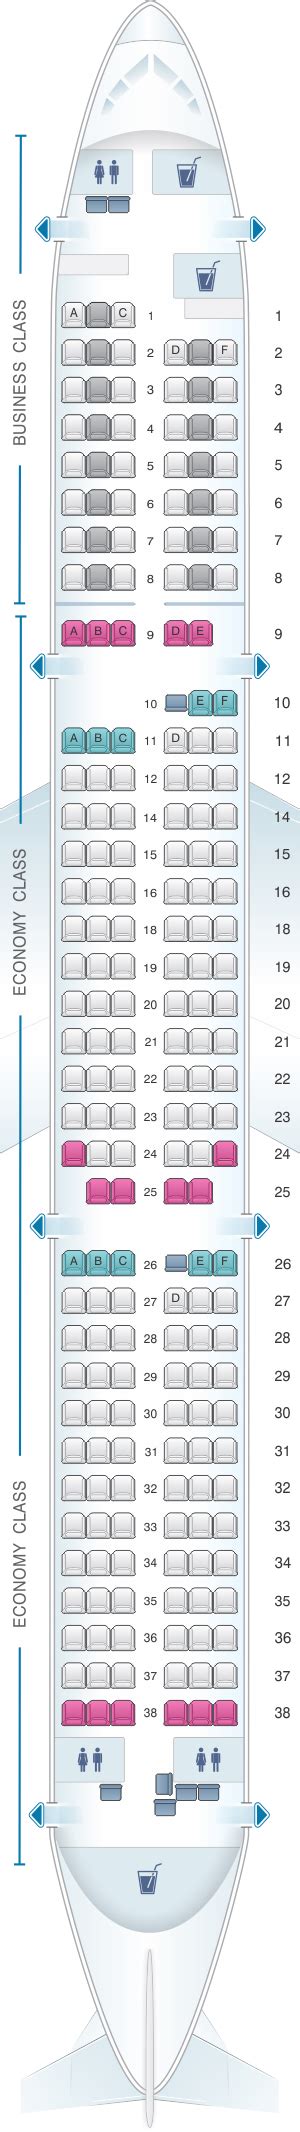 Lufthansa Airbus A320 Business Cl Seat Map My Bios